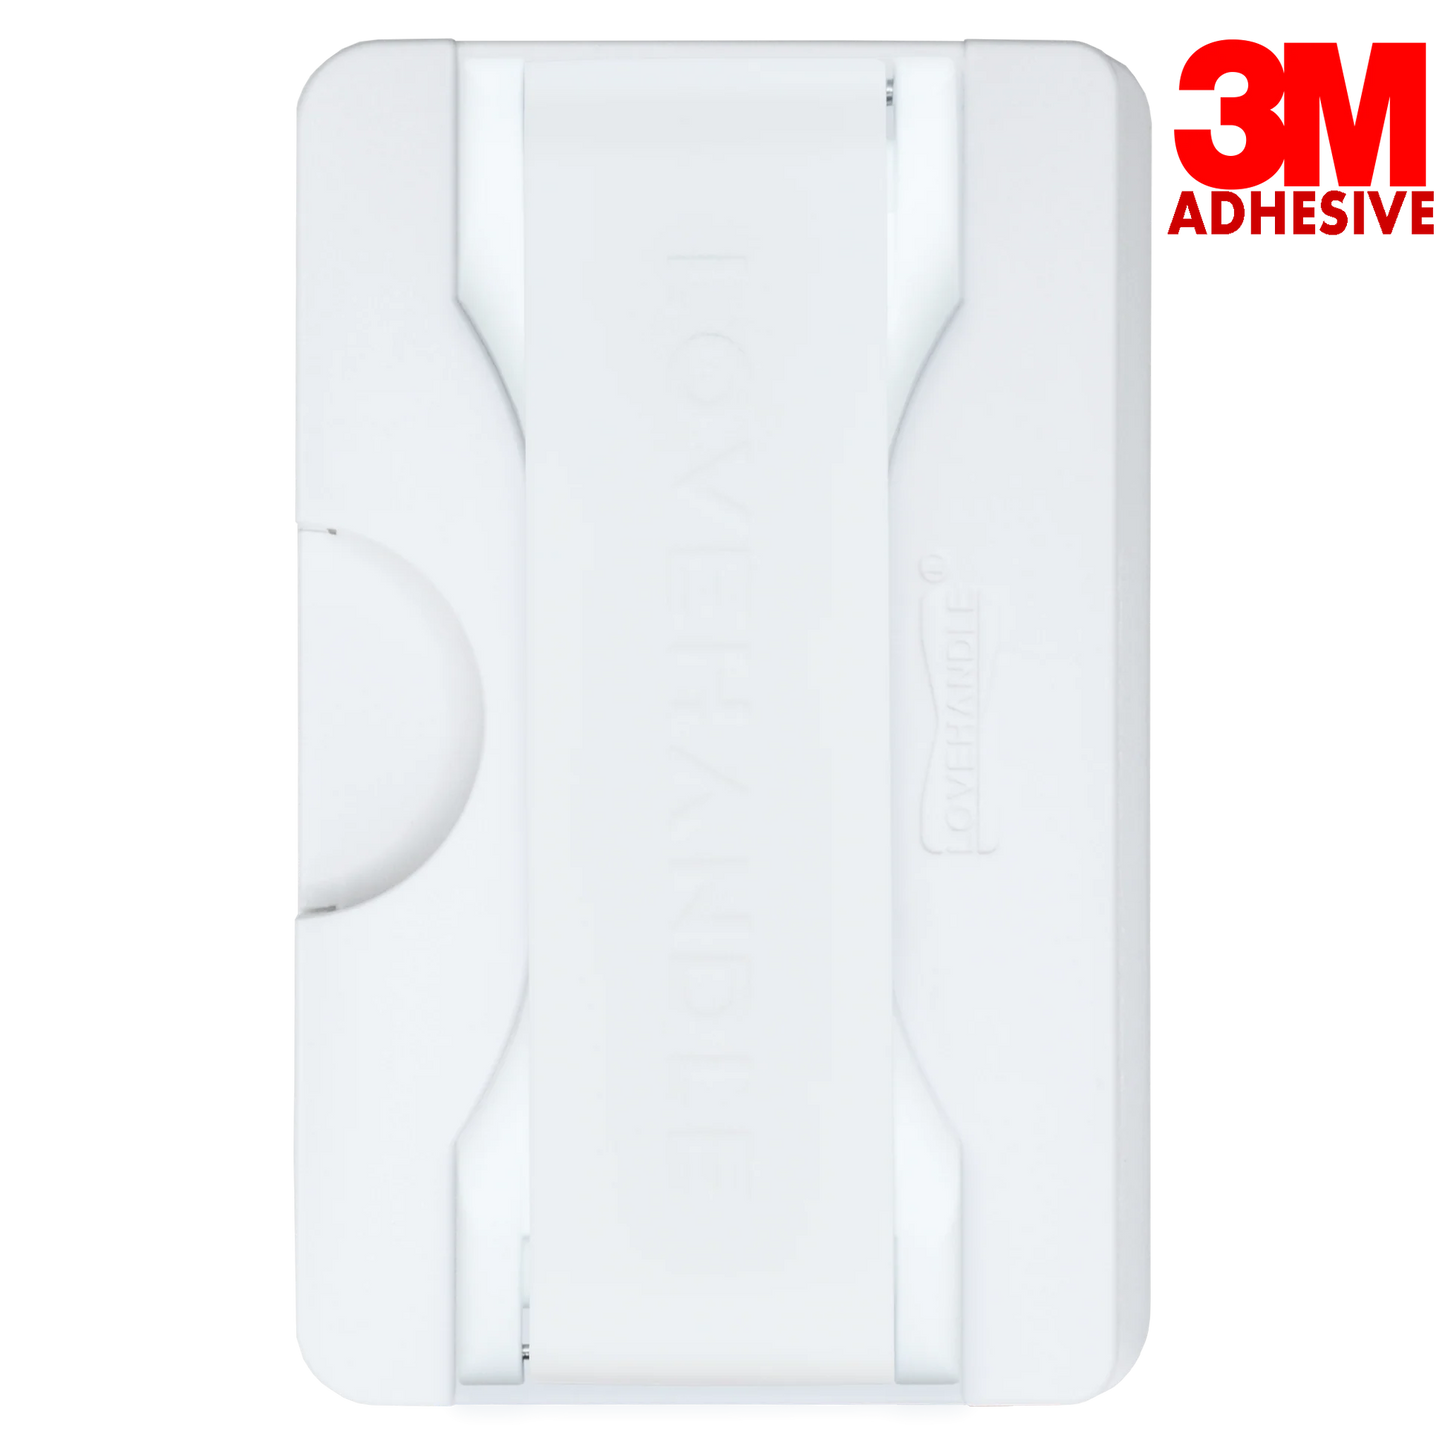 Lovehandle Magsafe Wallet - White